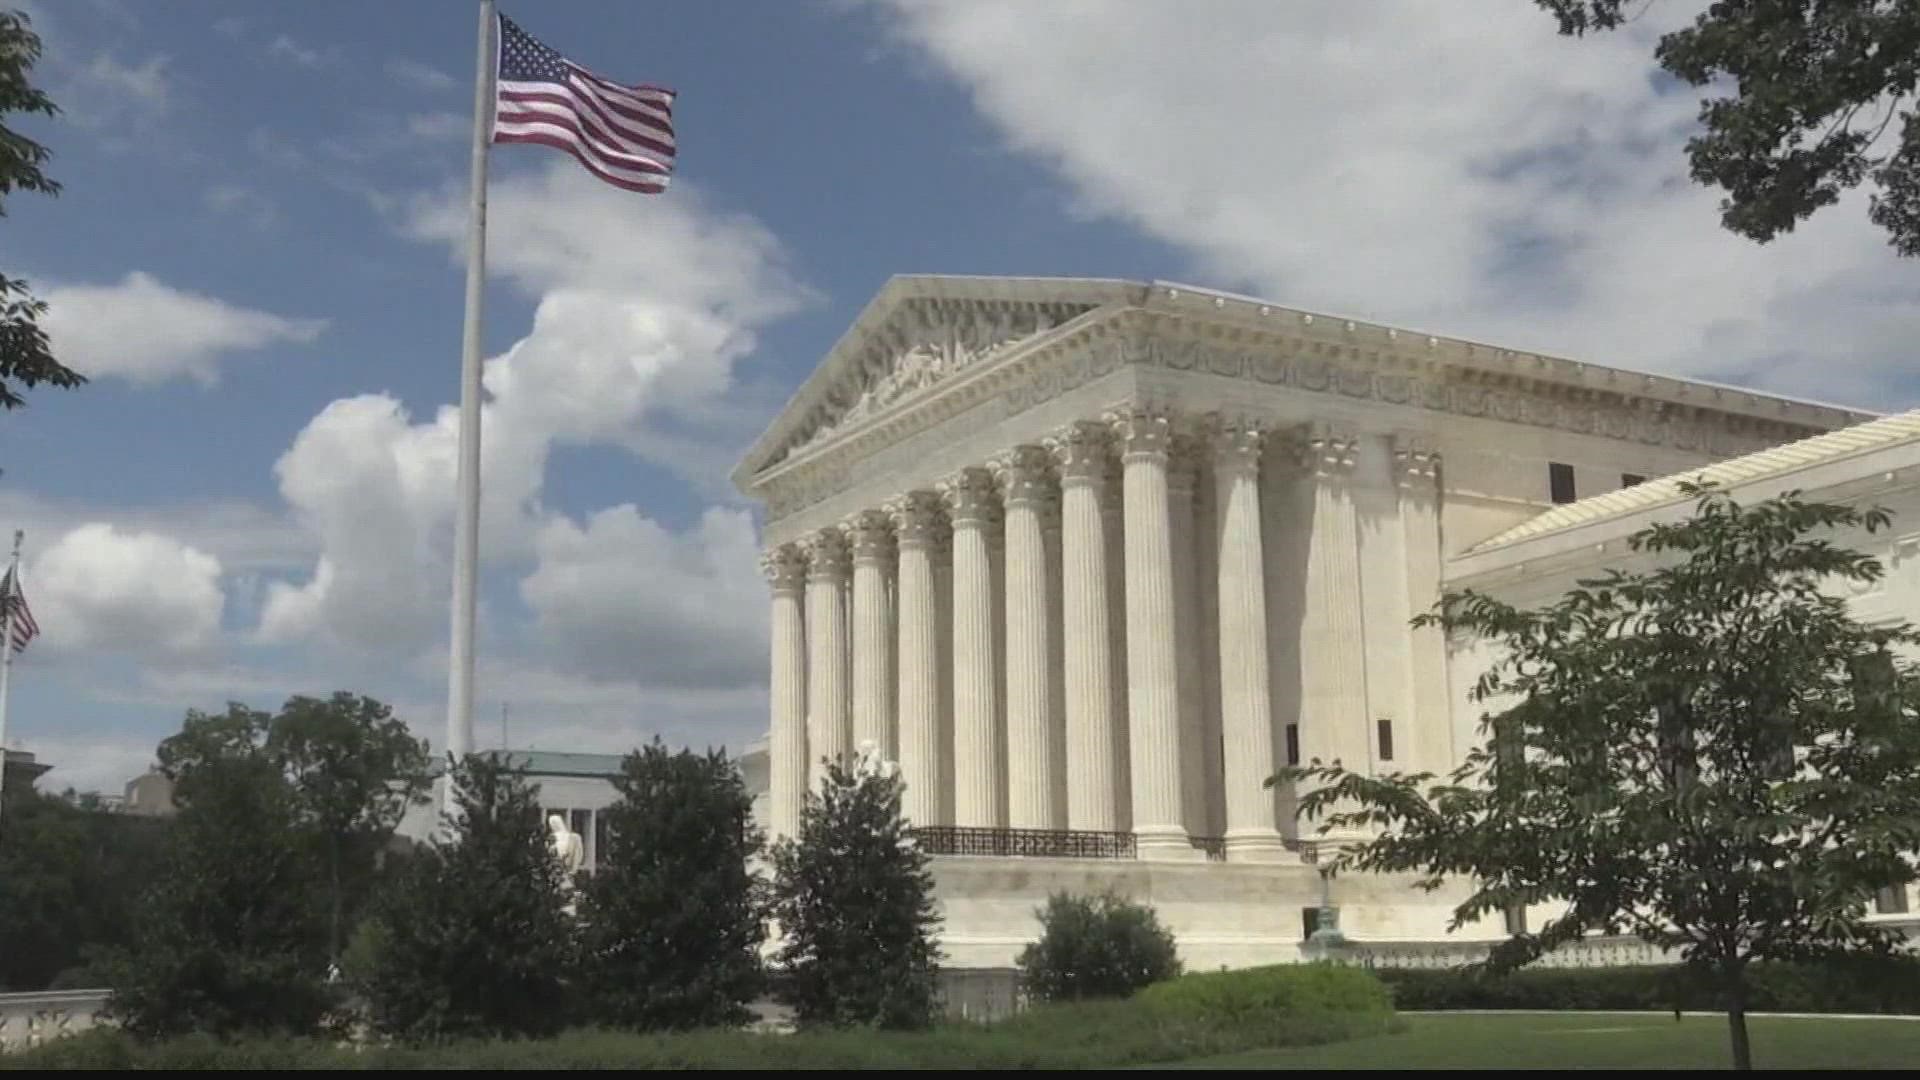 The Supreme Court announced it would take up a case that could dismantle affirmative action.